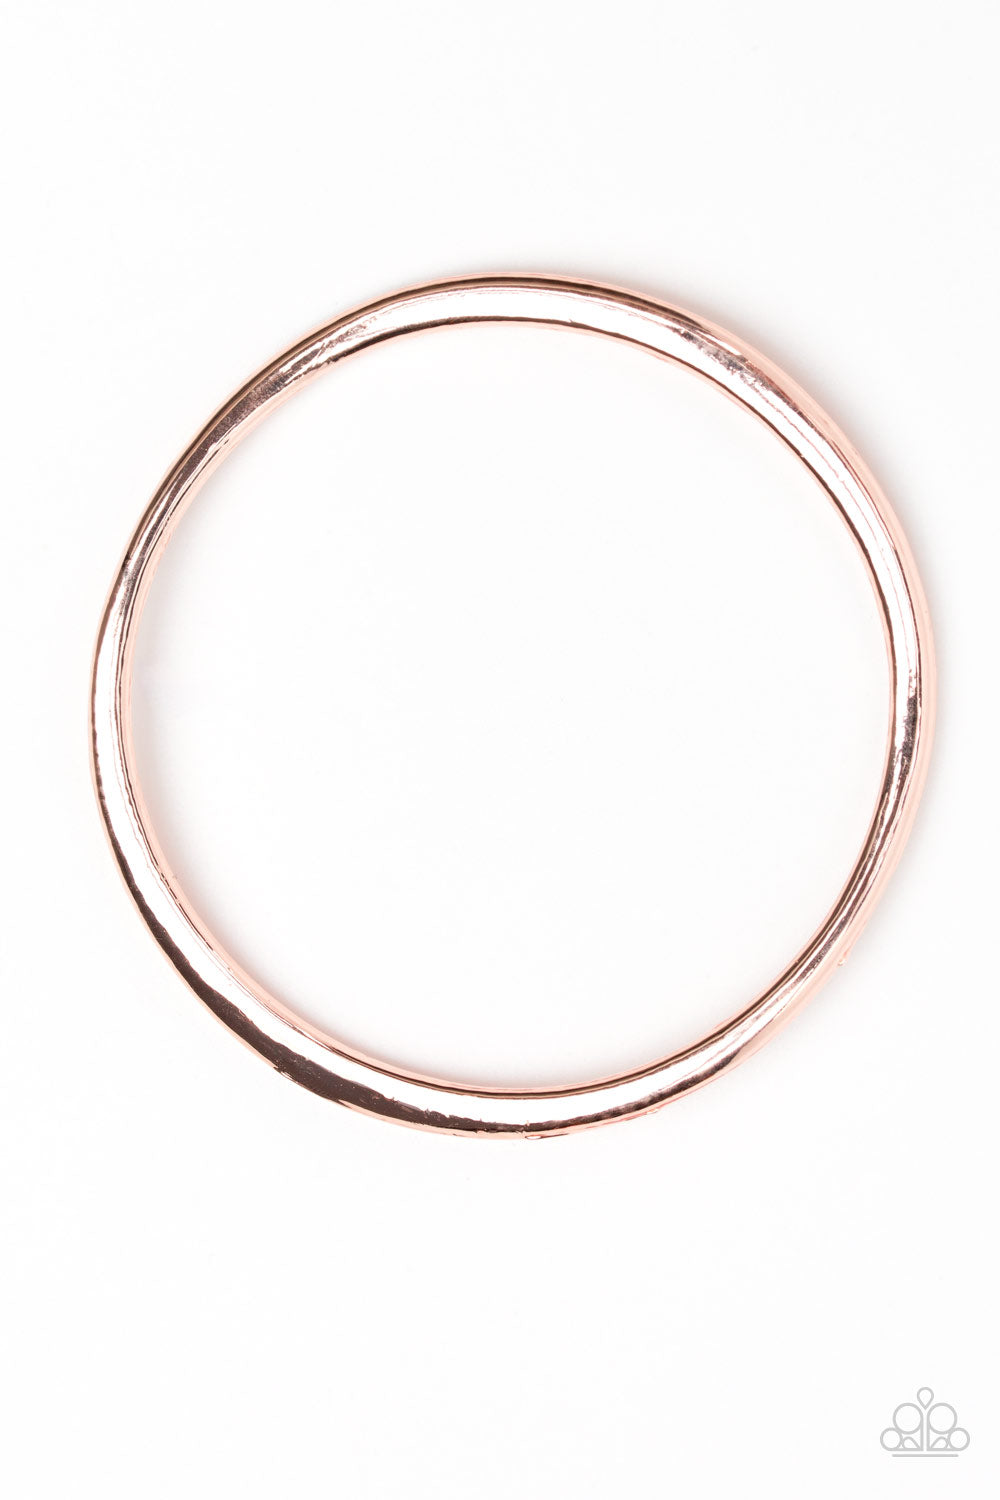 rose gold, rose gold jewelry, bangle, bracelet, everyday jewelry, affordable jewelry, paparazzi accessories 